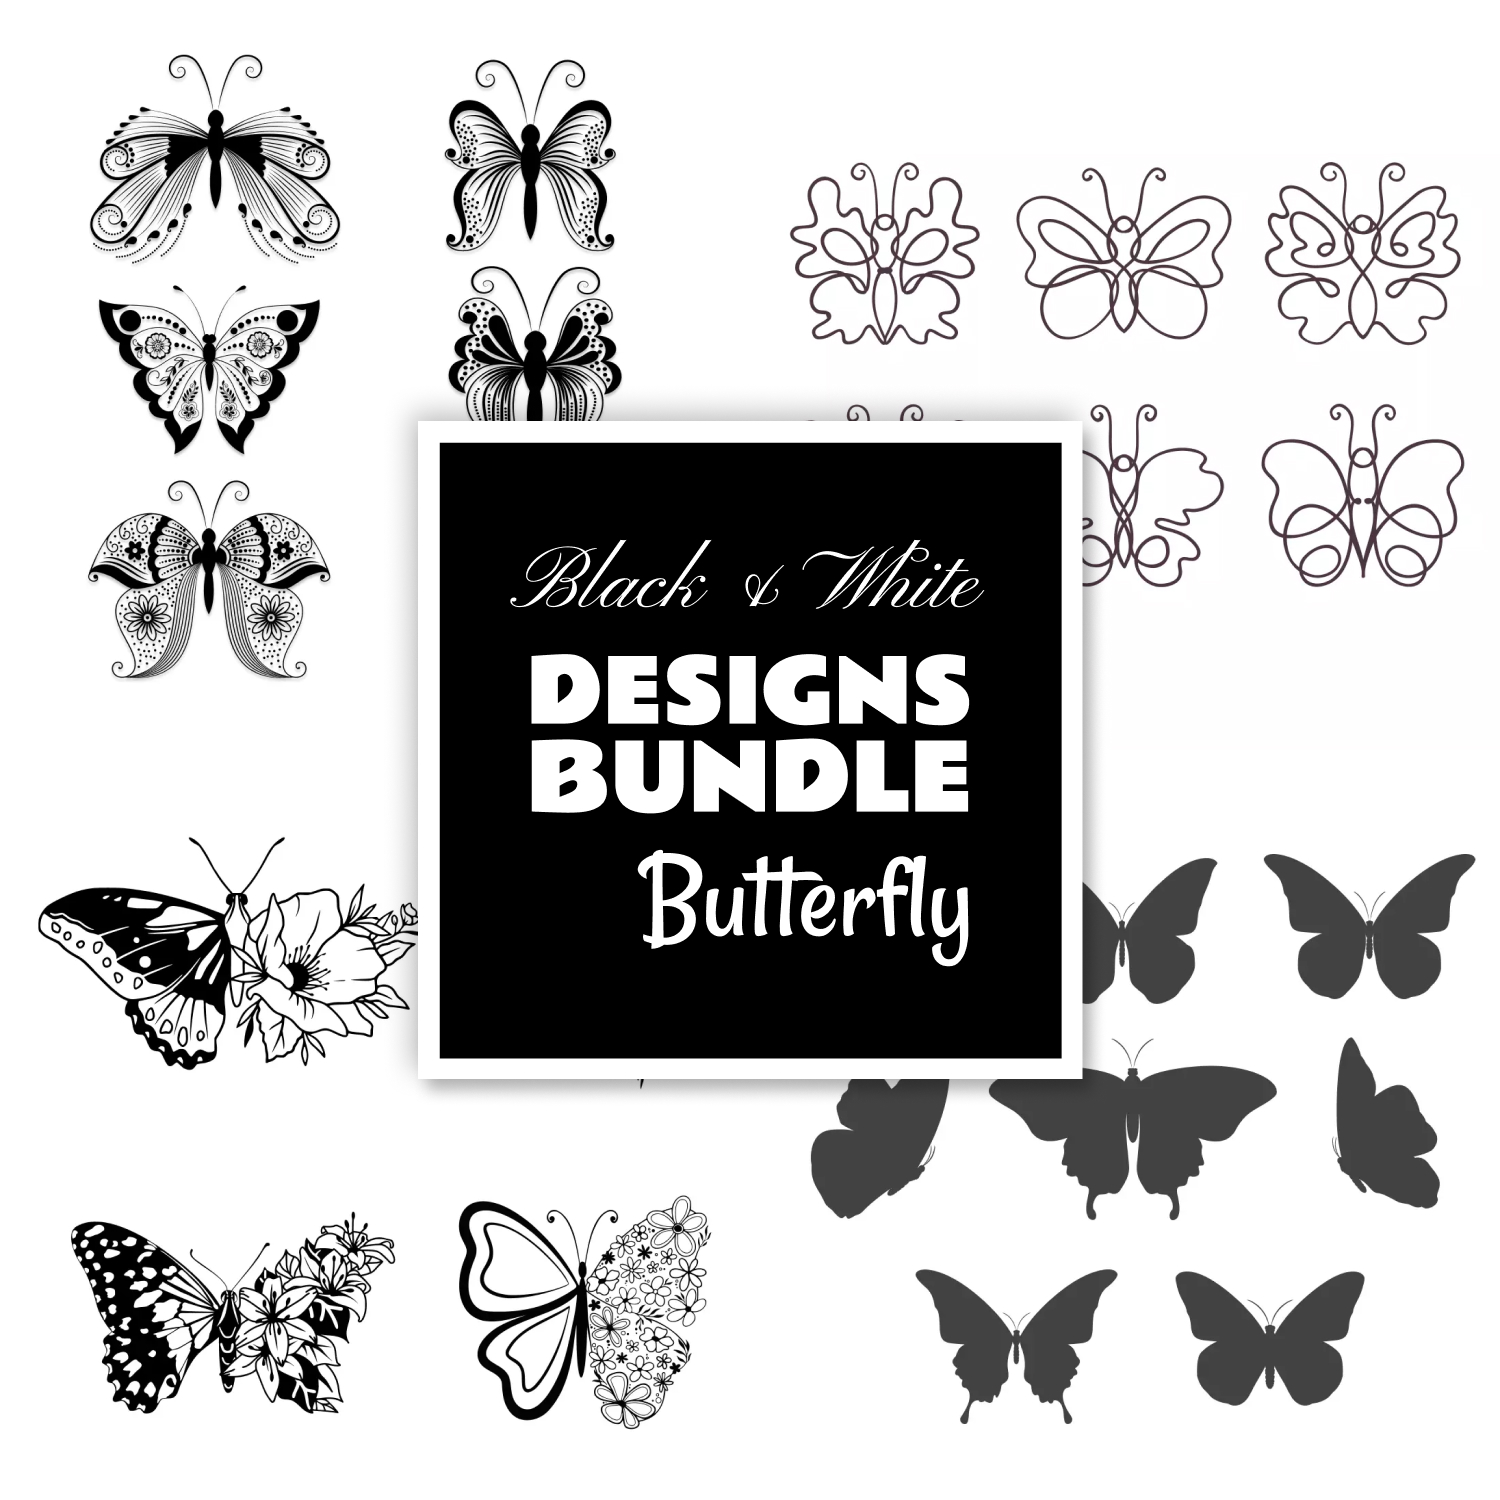 Bunch of butterflies that are black and white.